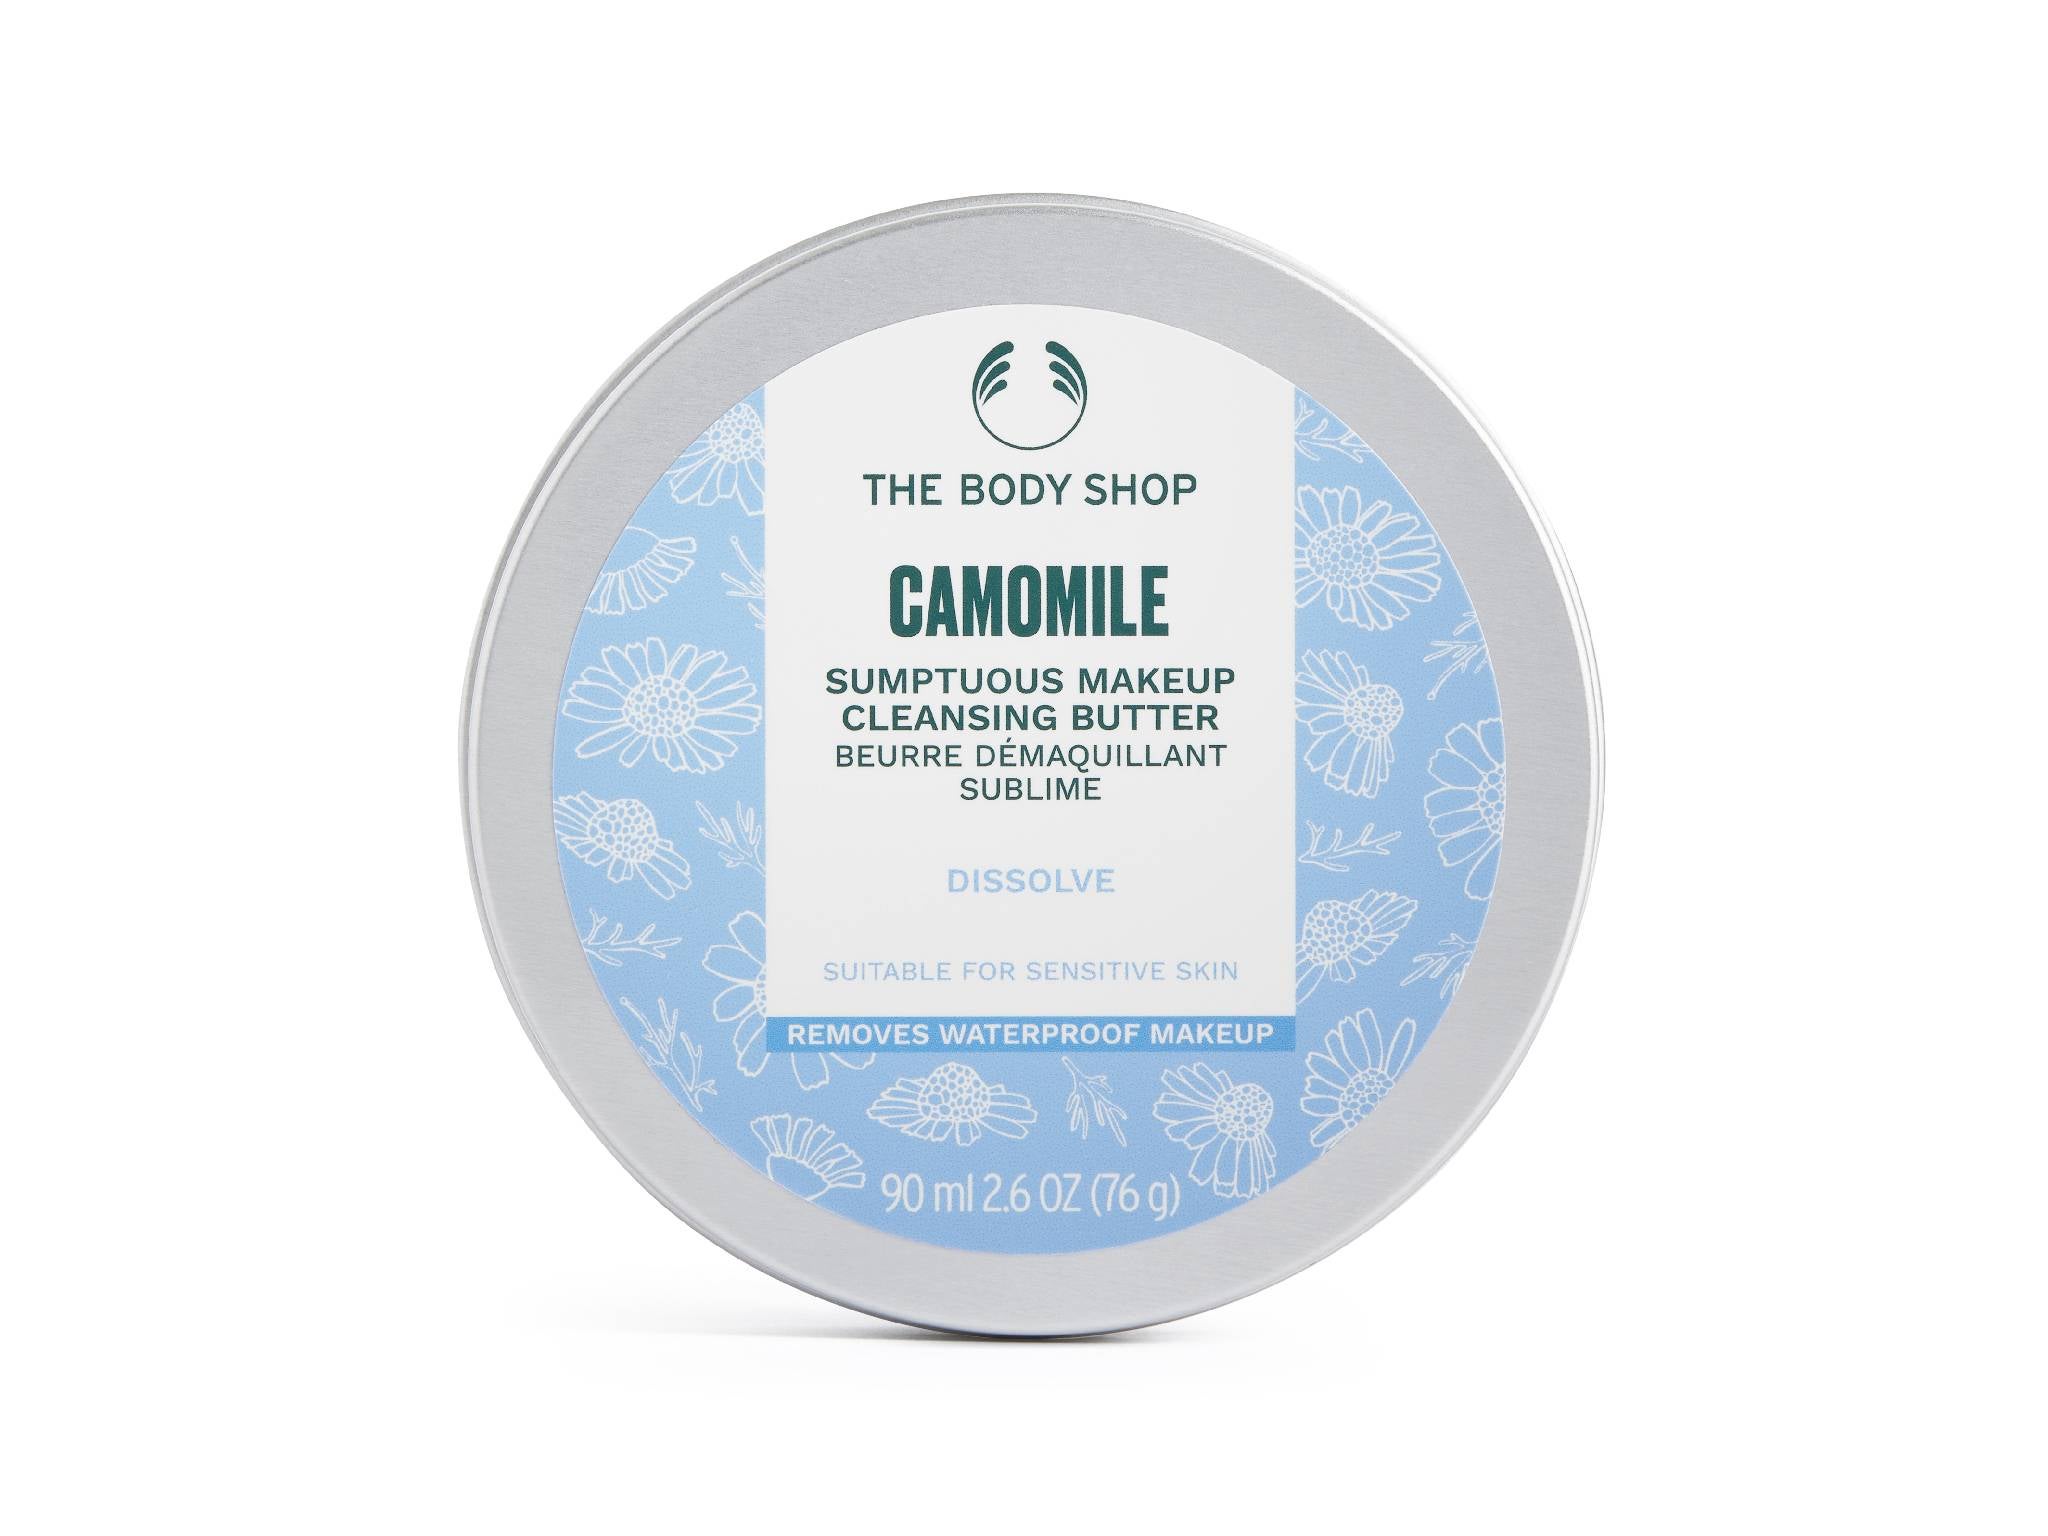 The Body Shop camomile sumptuous cleansing butter